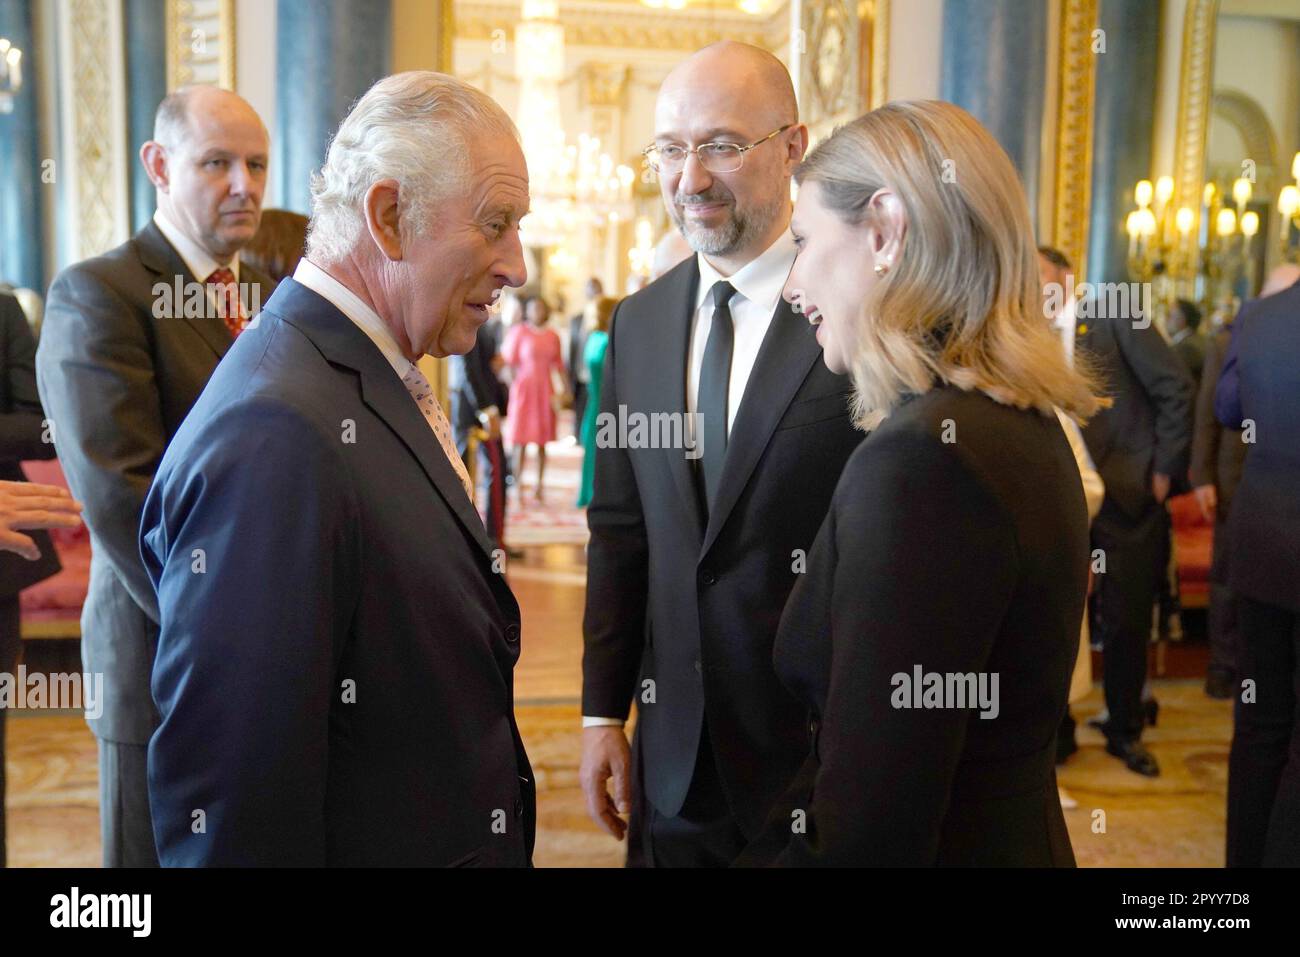 King Charles III (left) speaks to the First Lady of Ukraine Olena Zelenska and the Prime Minister of Ukraine, Denys Shmyhal, during a reception at Buckingham Palace, in London, for overseas guests attending his coronation. Picture date: Friday May 5, 2023. Stock Photo